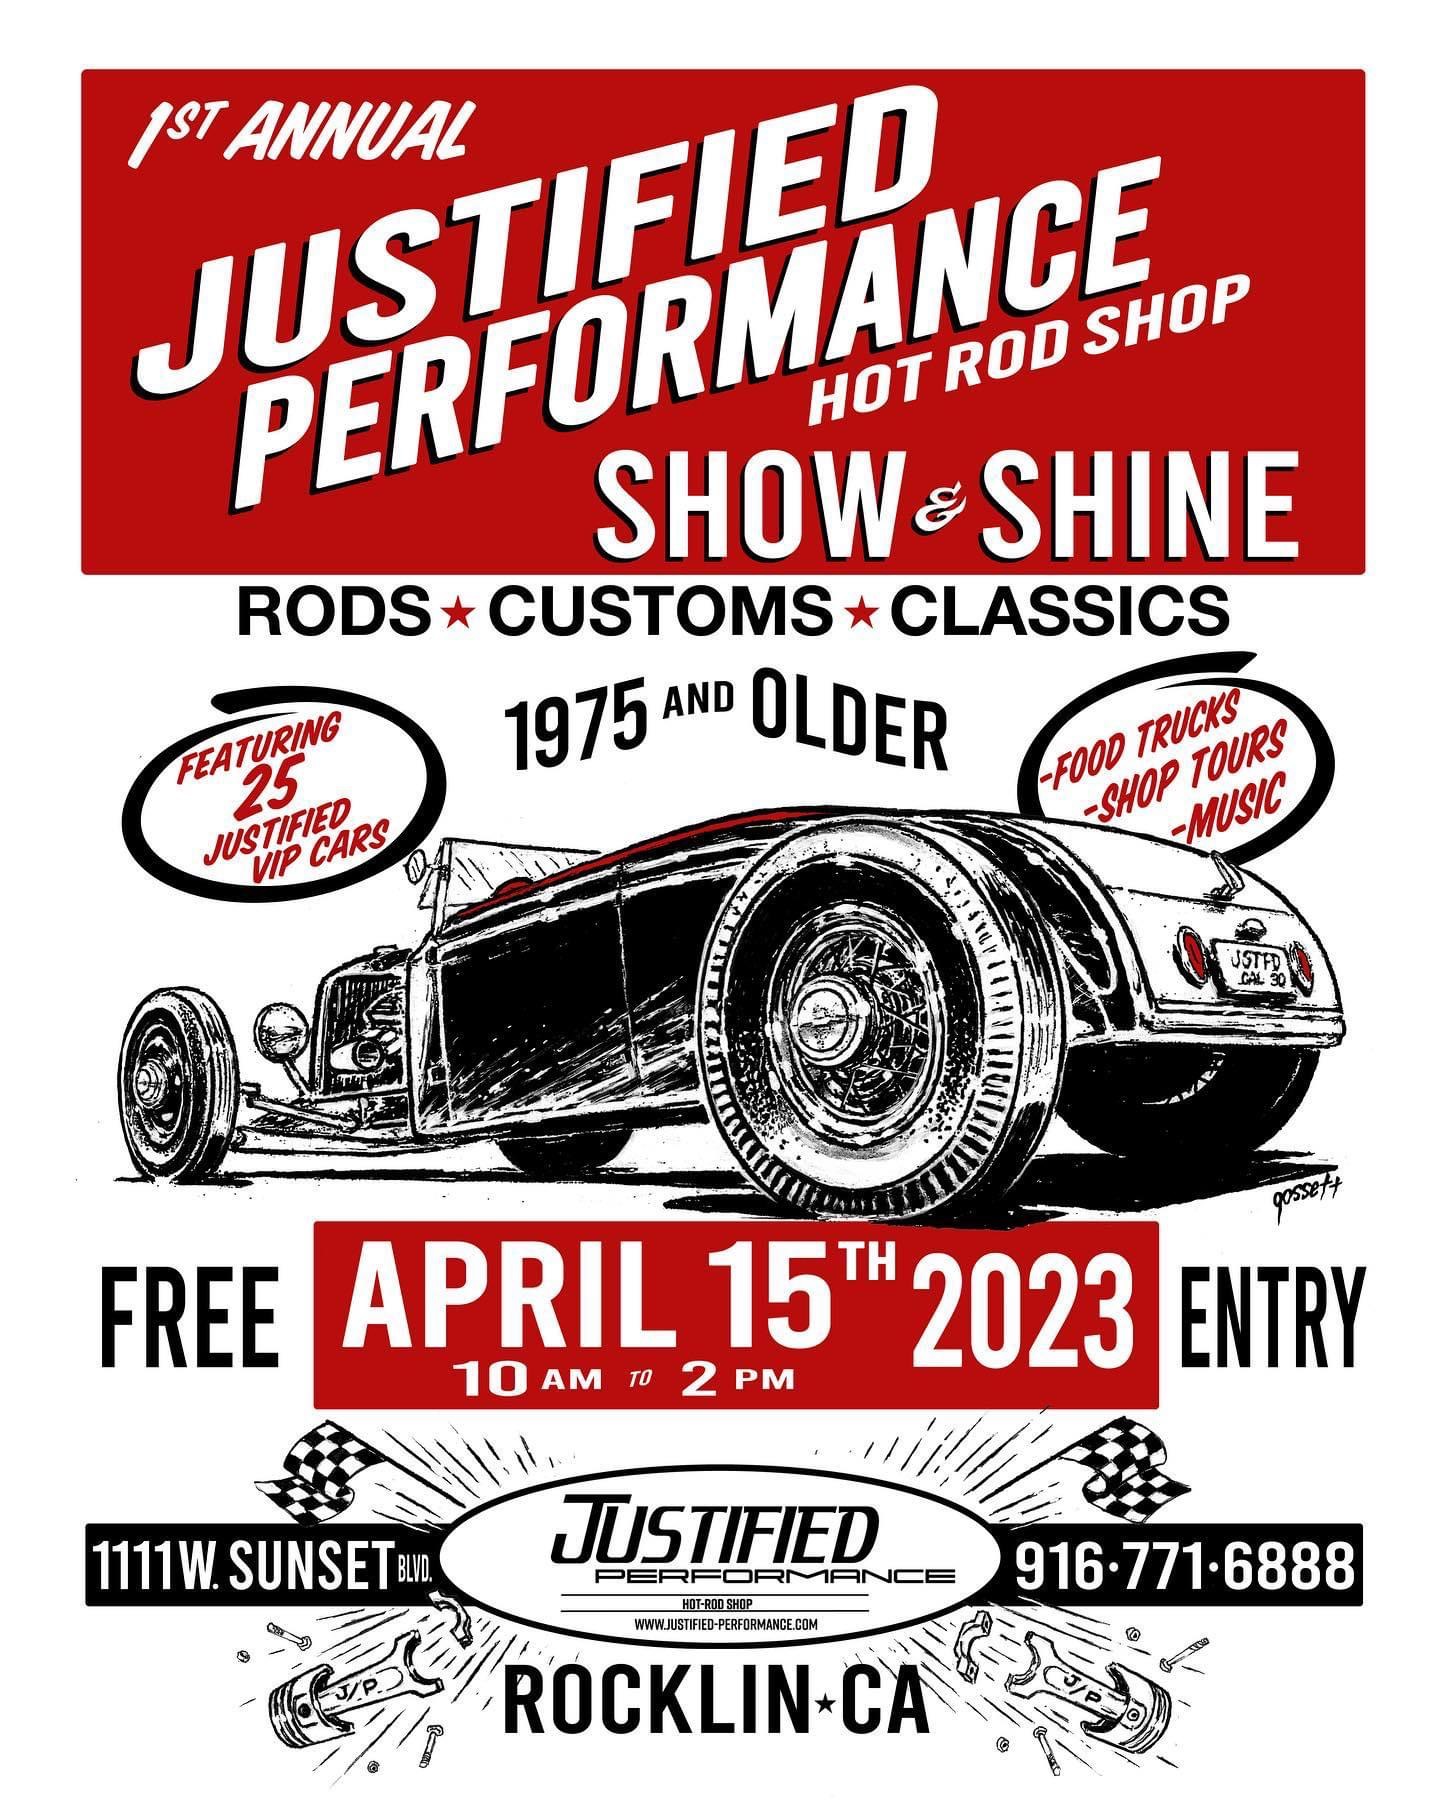 Justified Performance Car Show